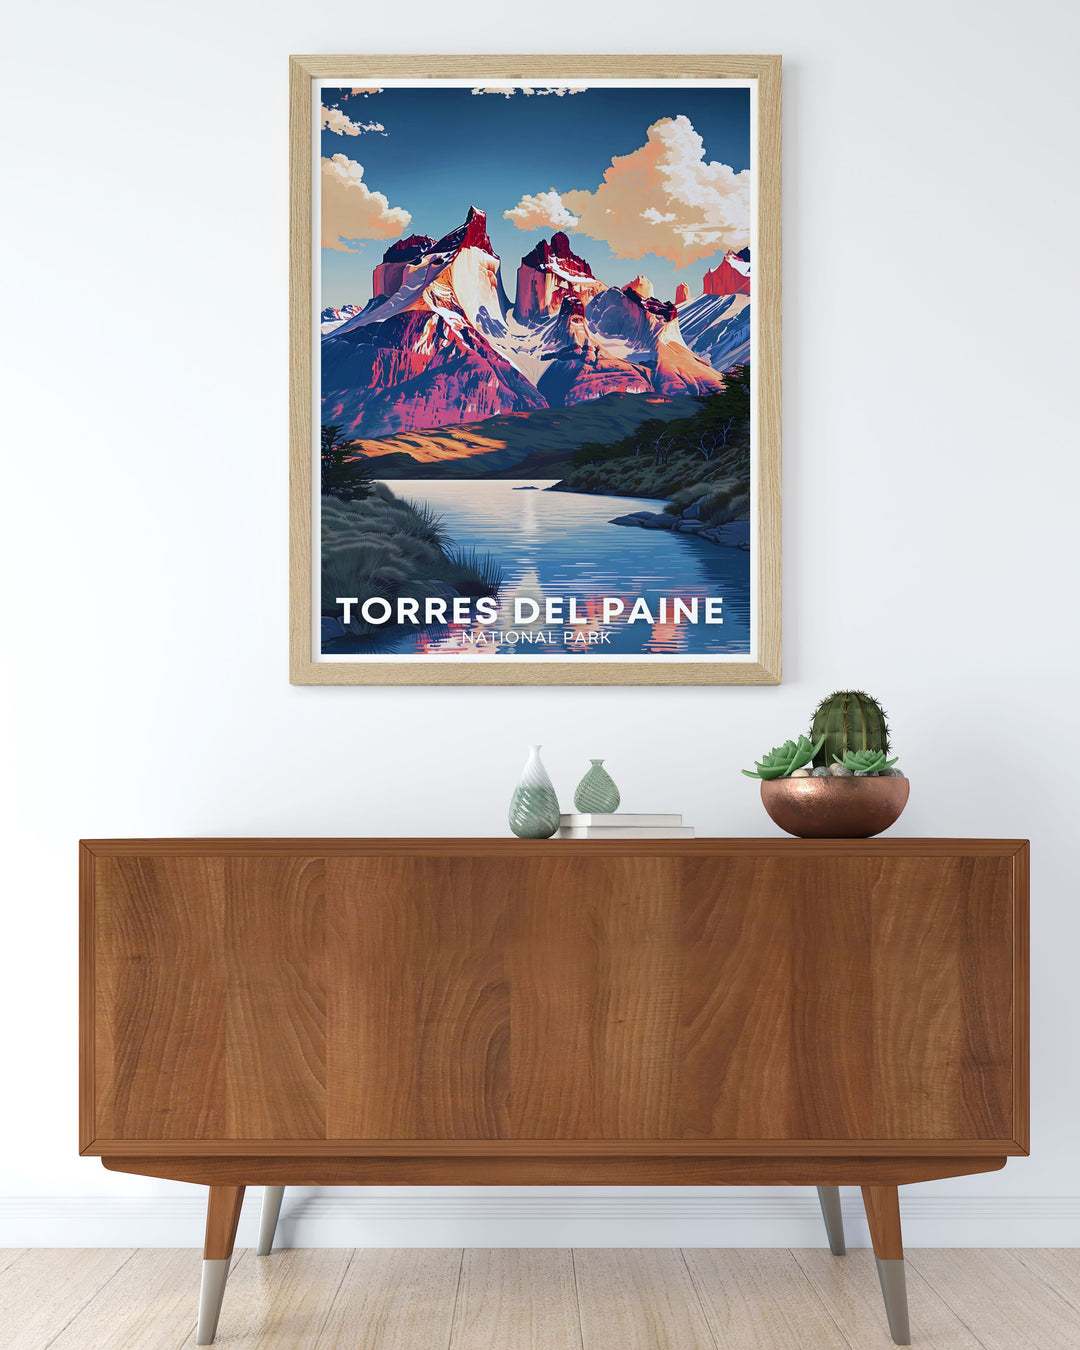 South America poster featuring the iconic Cuernos del Paine in Torres del Paine National Park, Patagonia Chile. This retro travel poster is perfect for those who love adventure and scenic landscapes, adding a touch of elegance and inspiration to any room.